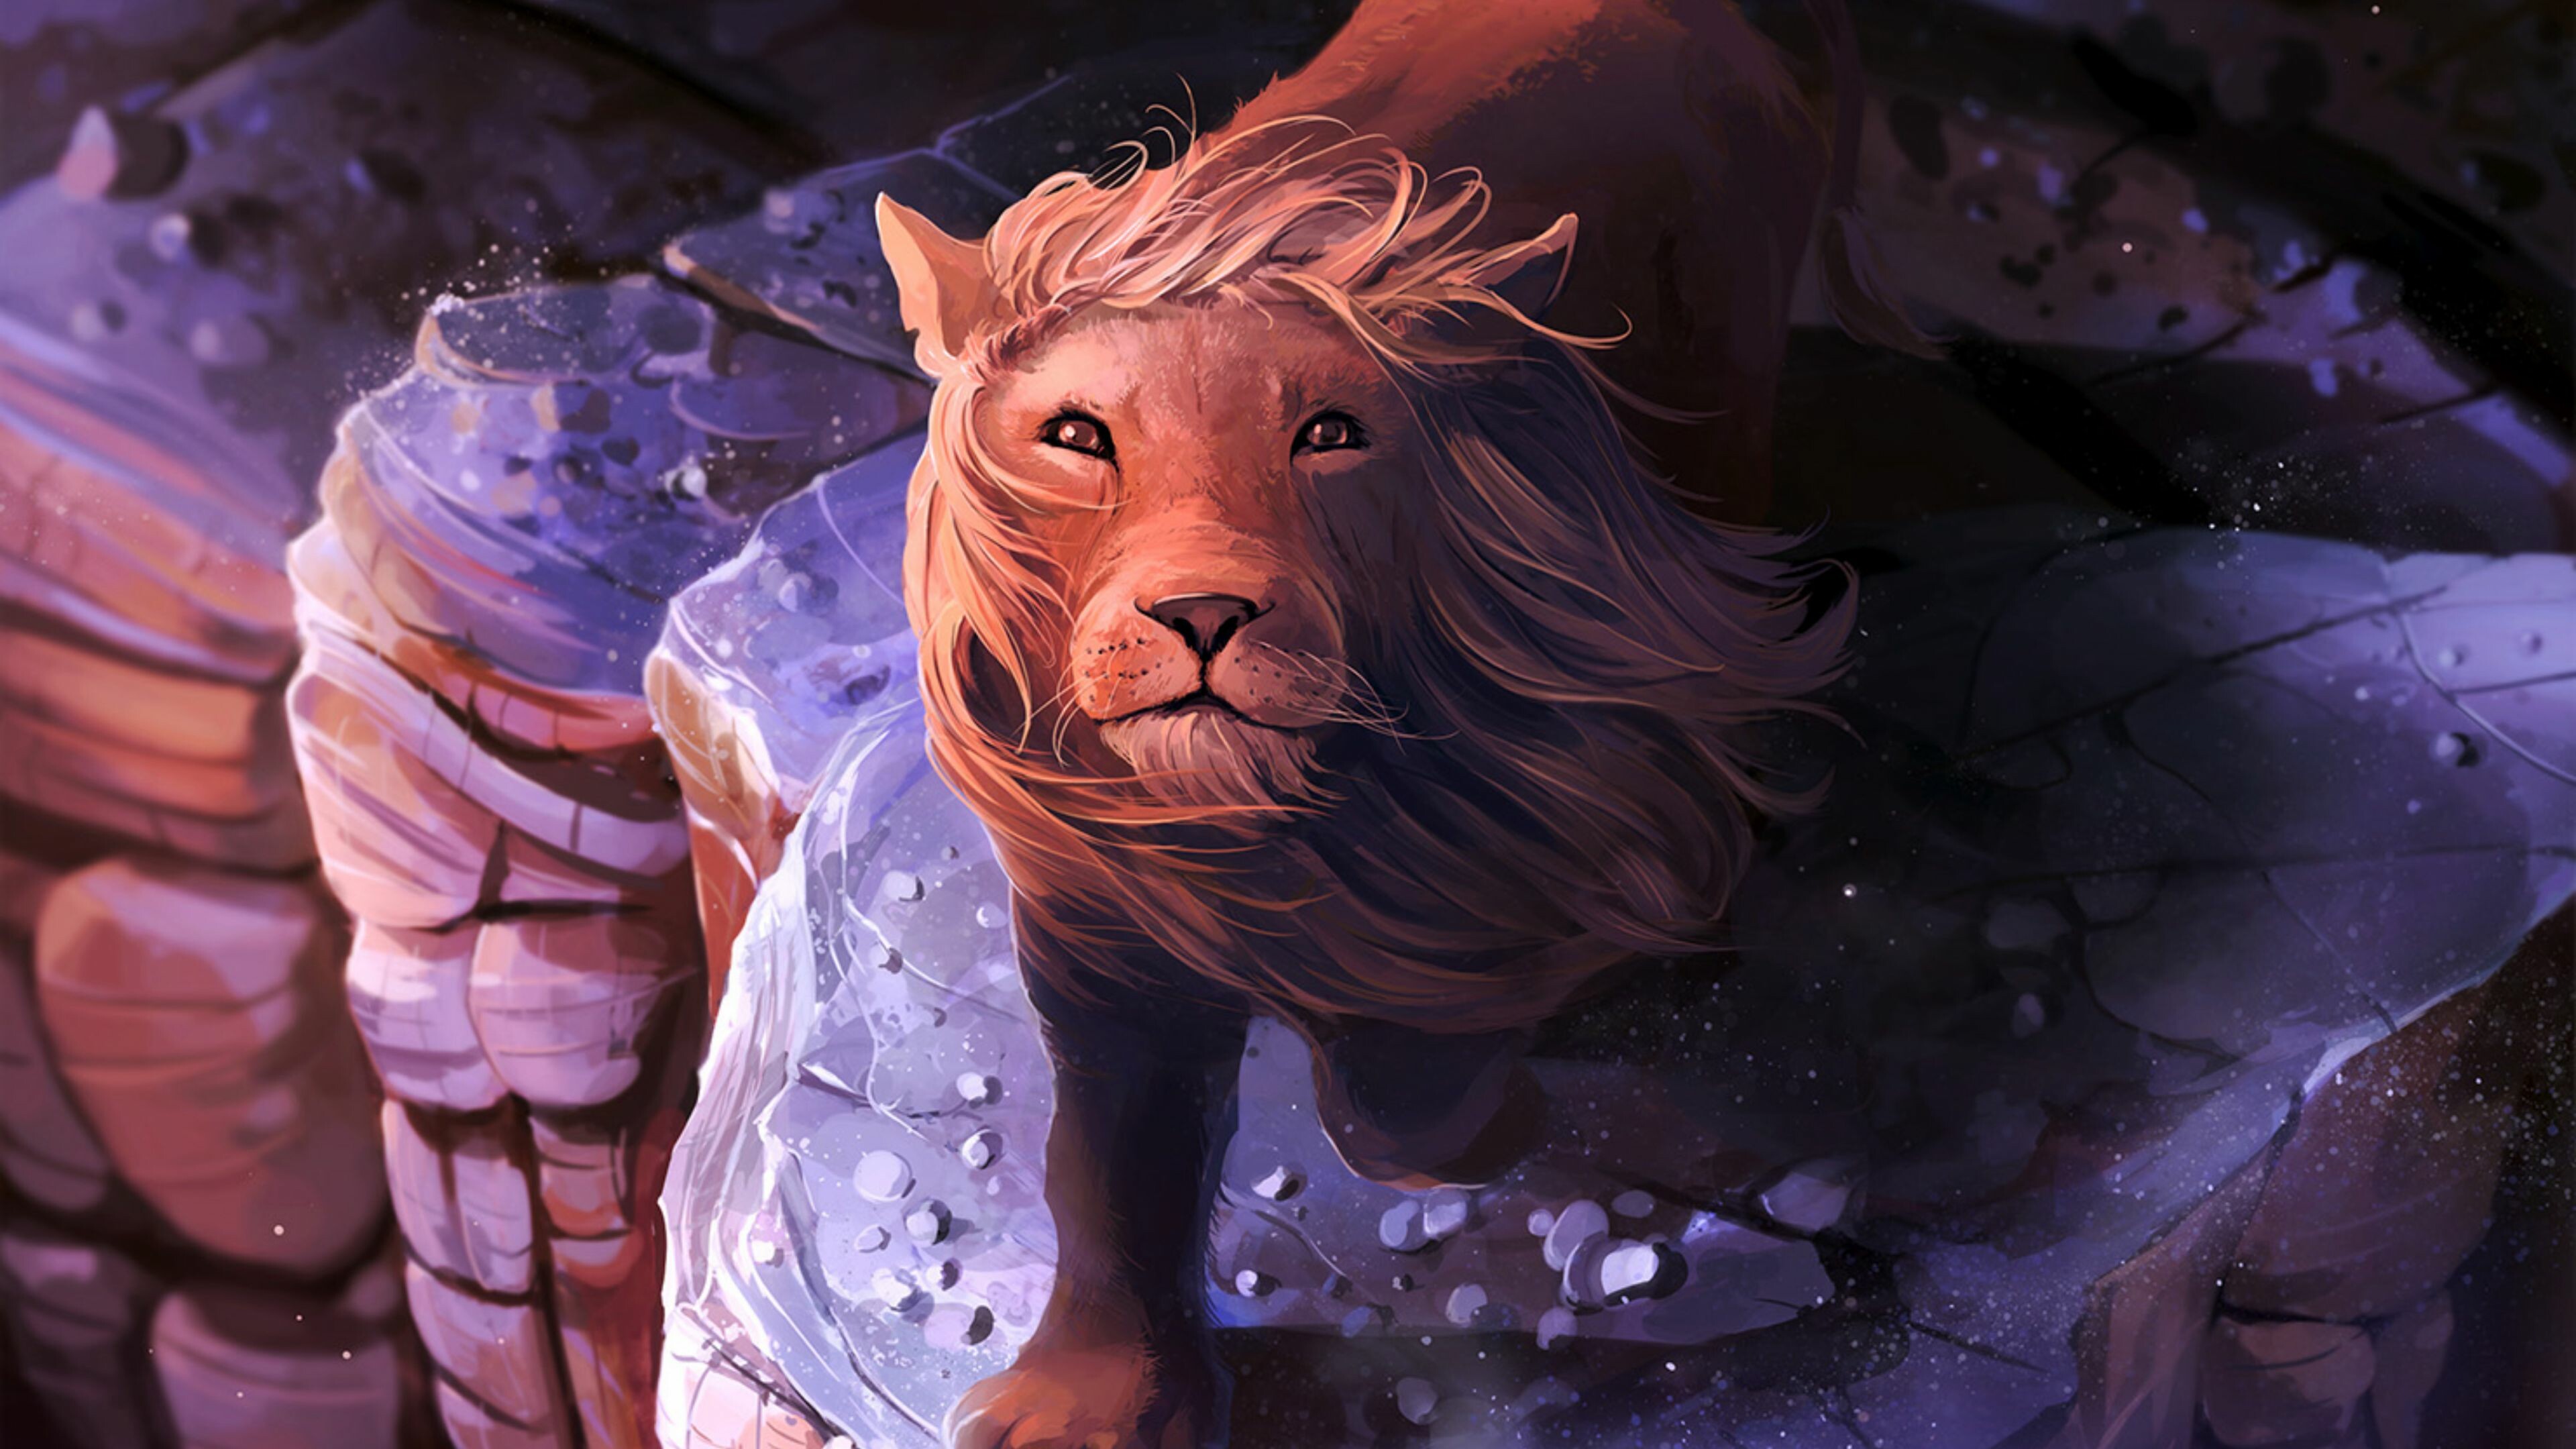 Lion: Cultural depictions of lions were prominent in Ancient Egypt, and depictions have occurred in virtually all ancient and medieval cultures in the lion's historic and current range, Fantasy art. 3840x2160 4K Wallpaper.